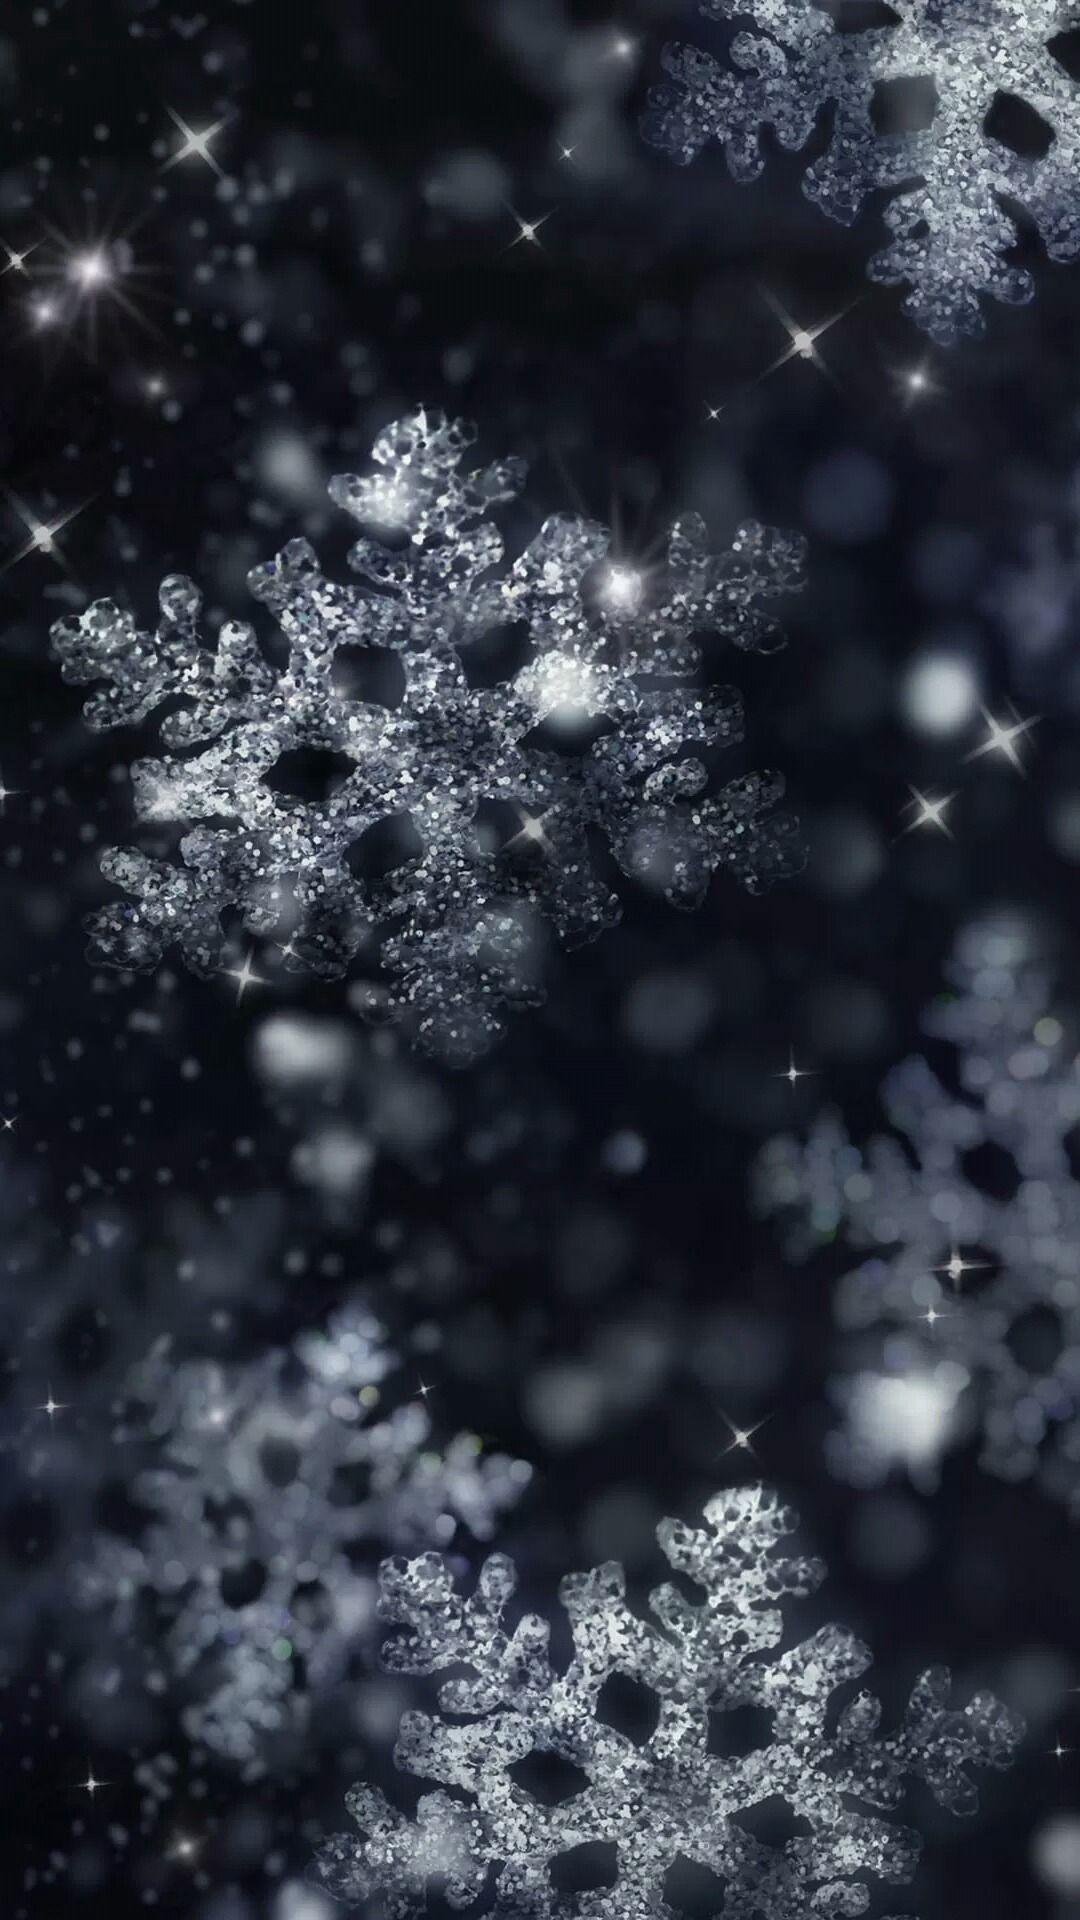 Night glittering snowflakes to see more #beautiful #snow & #snowflakes #wi. Christmas wallpaper tumblr, Wallpaper iphone christmas, iPhone wallpaper winter